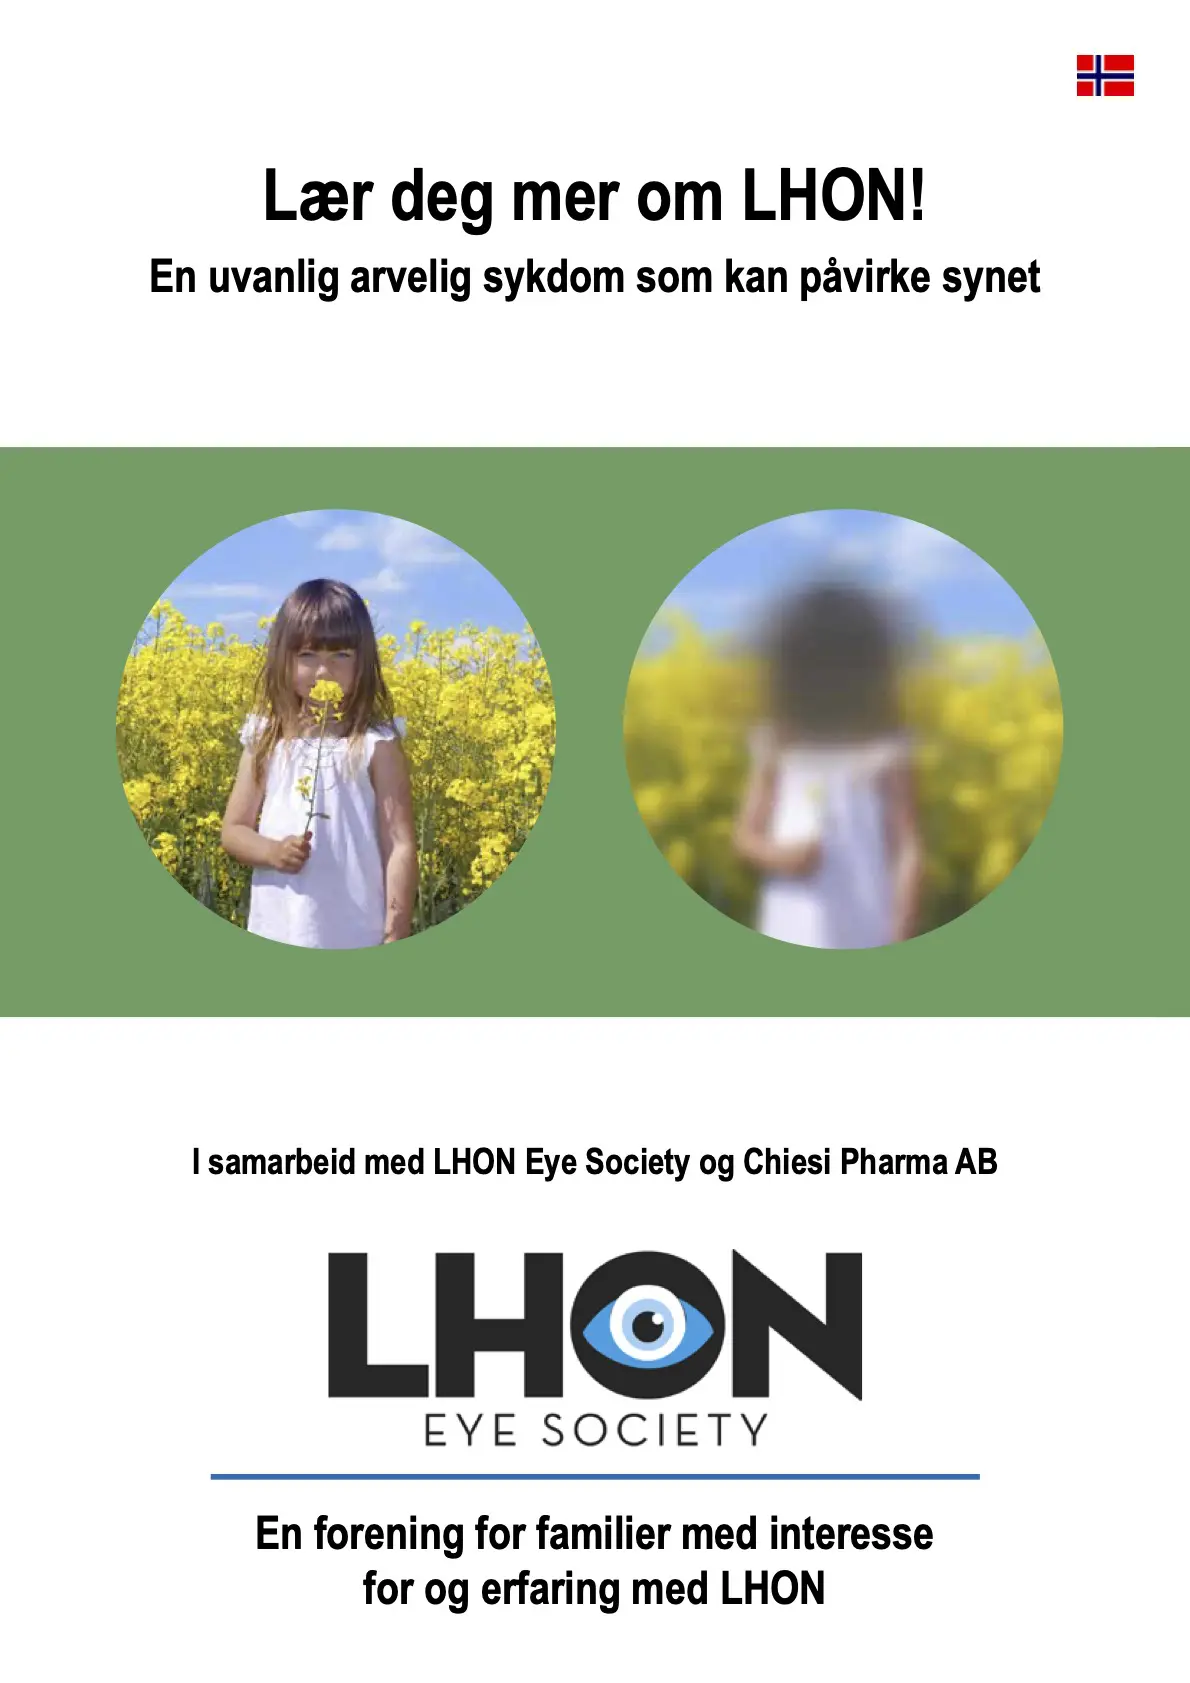 cover image for brochure about LHON in Norwegian